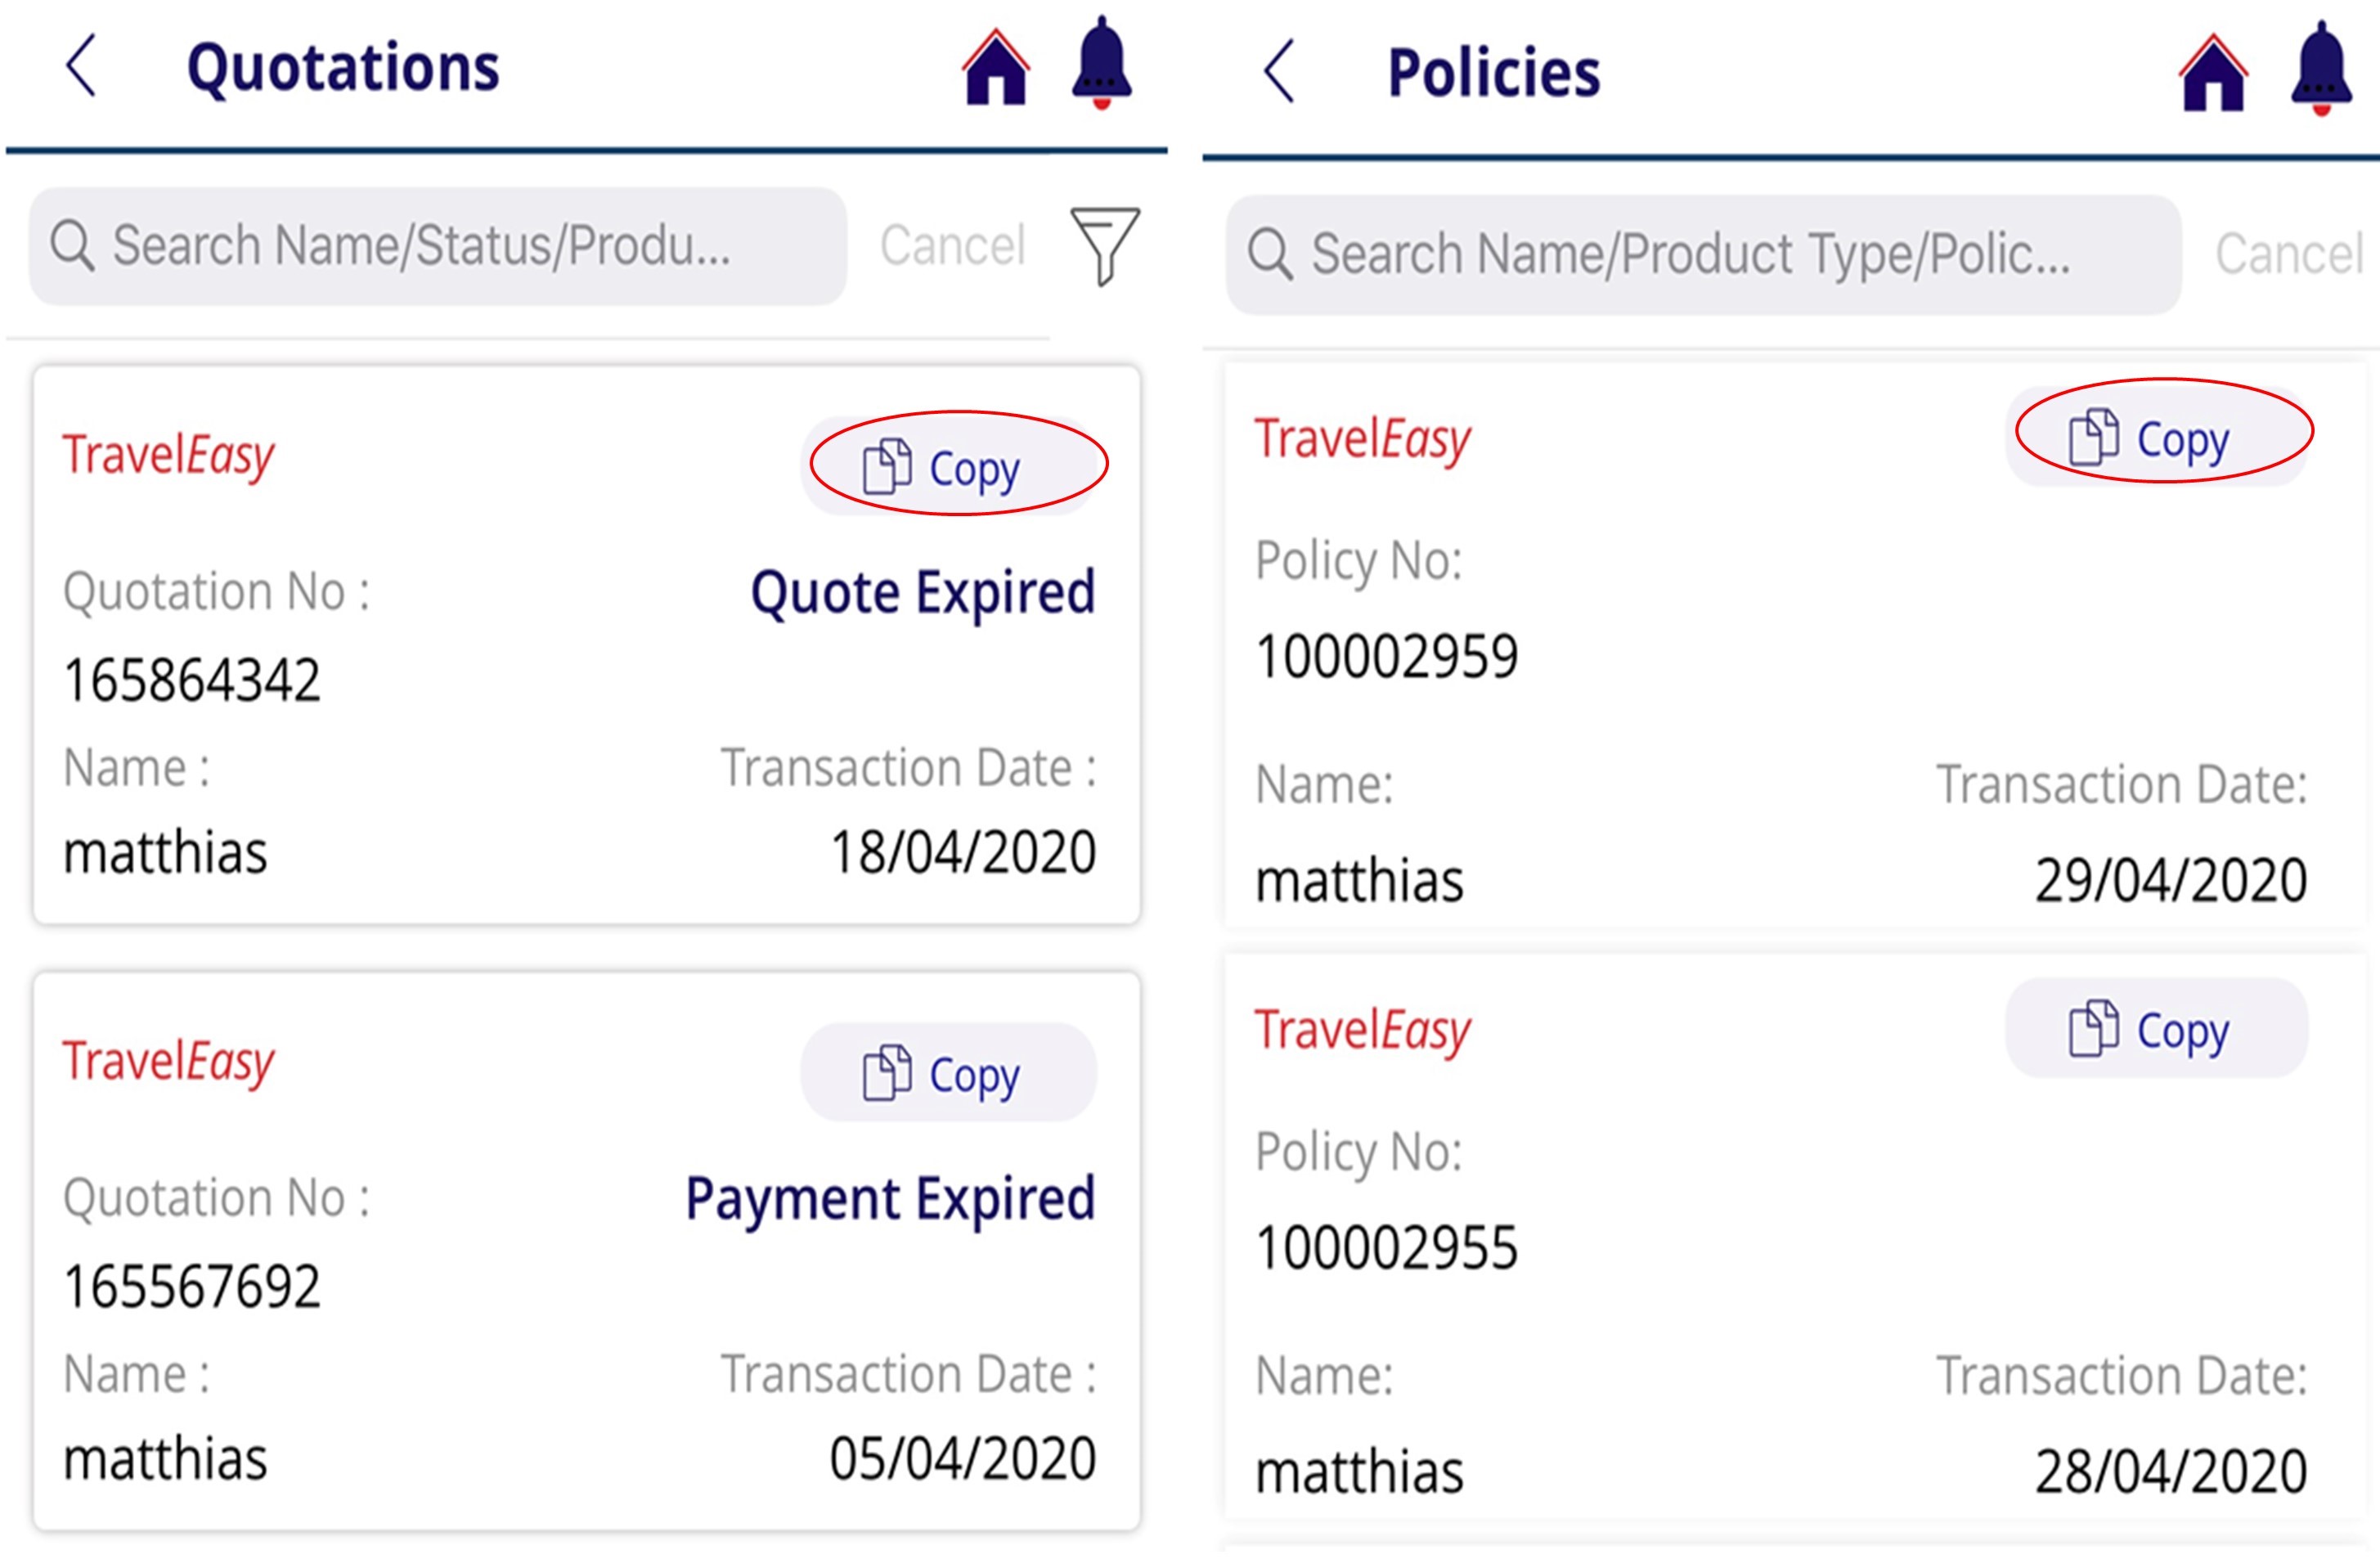 Copy-trade all types of quotations/ policies via the mPartner app. 